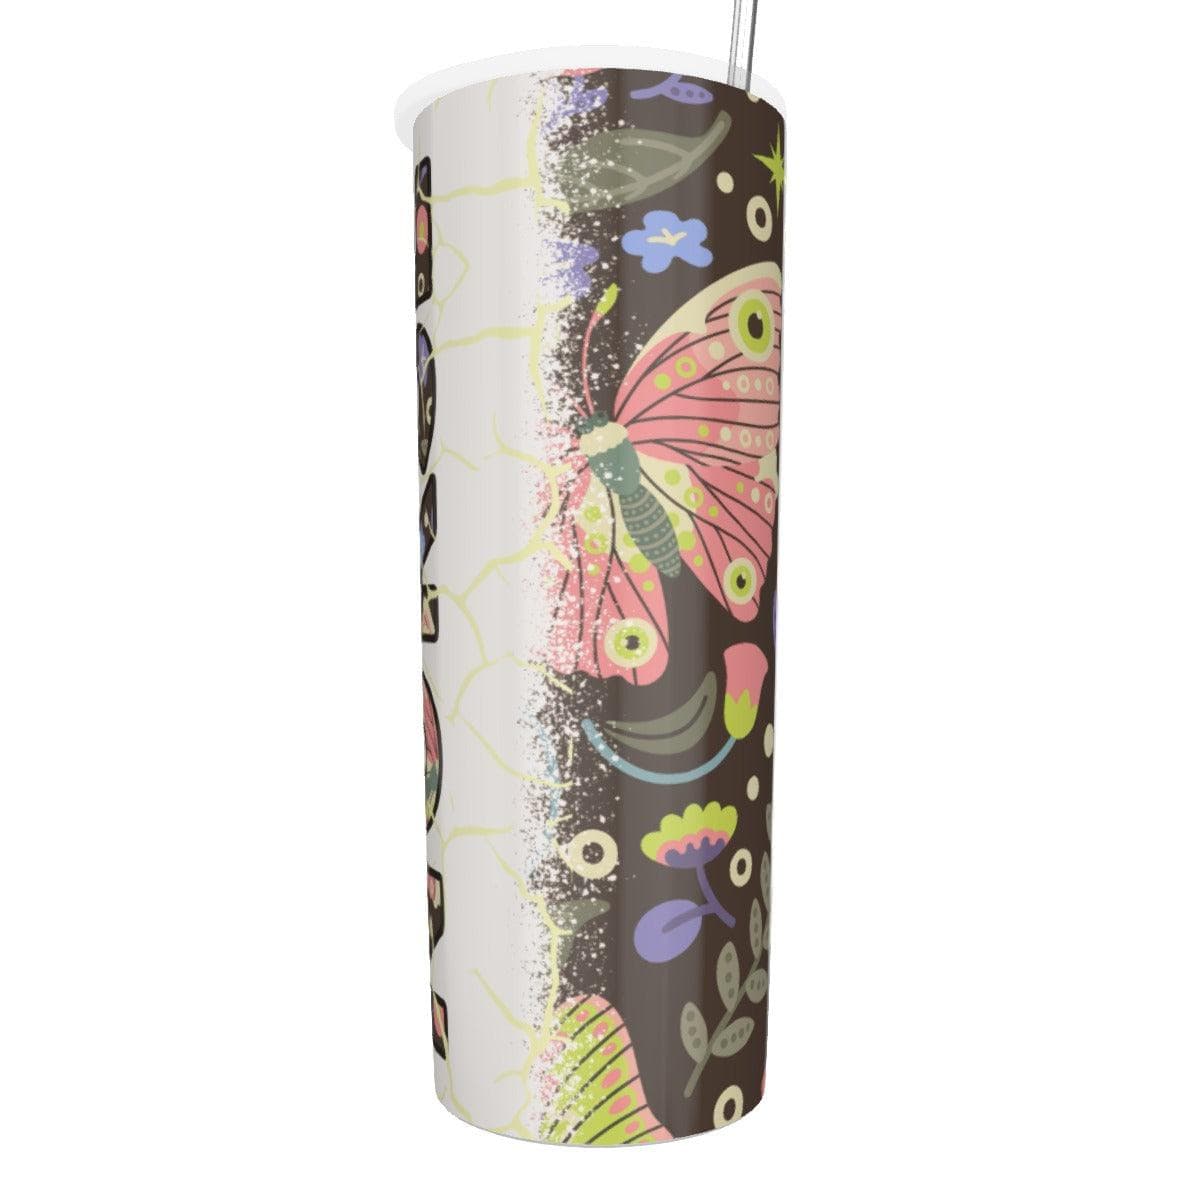 Nurse Loves Nature Tumbler With Stainless Steel Straw 20oz - Thumbedtreats